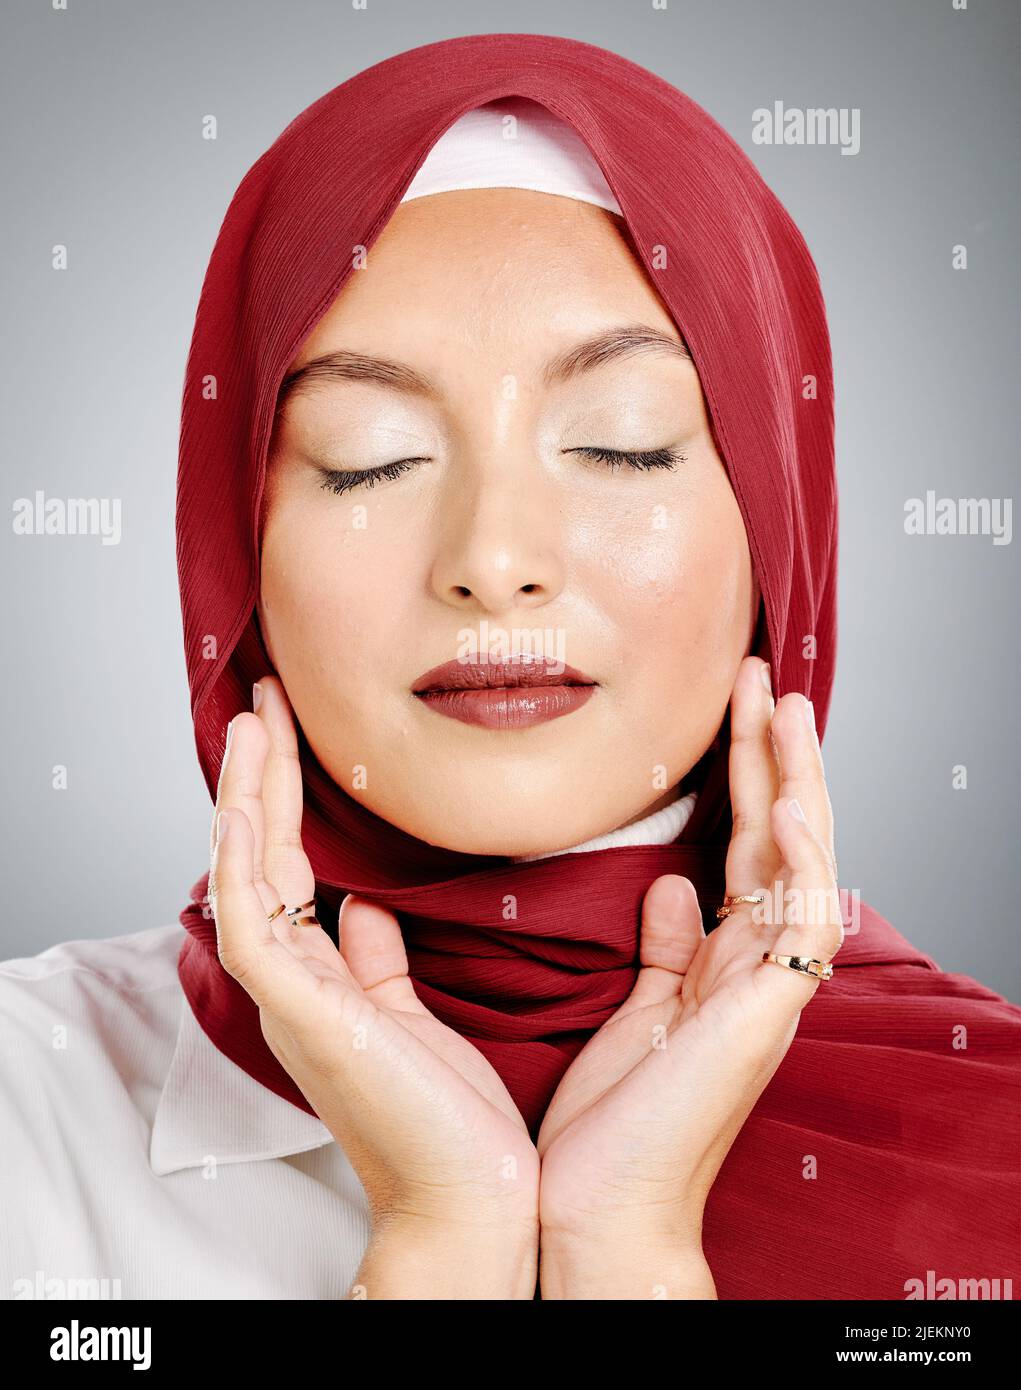 One beautiful young muslim woman with eyes closed wearing red headscarf and lipstick against grey studio background. Modest arab female wearing makeup Stock Photo